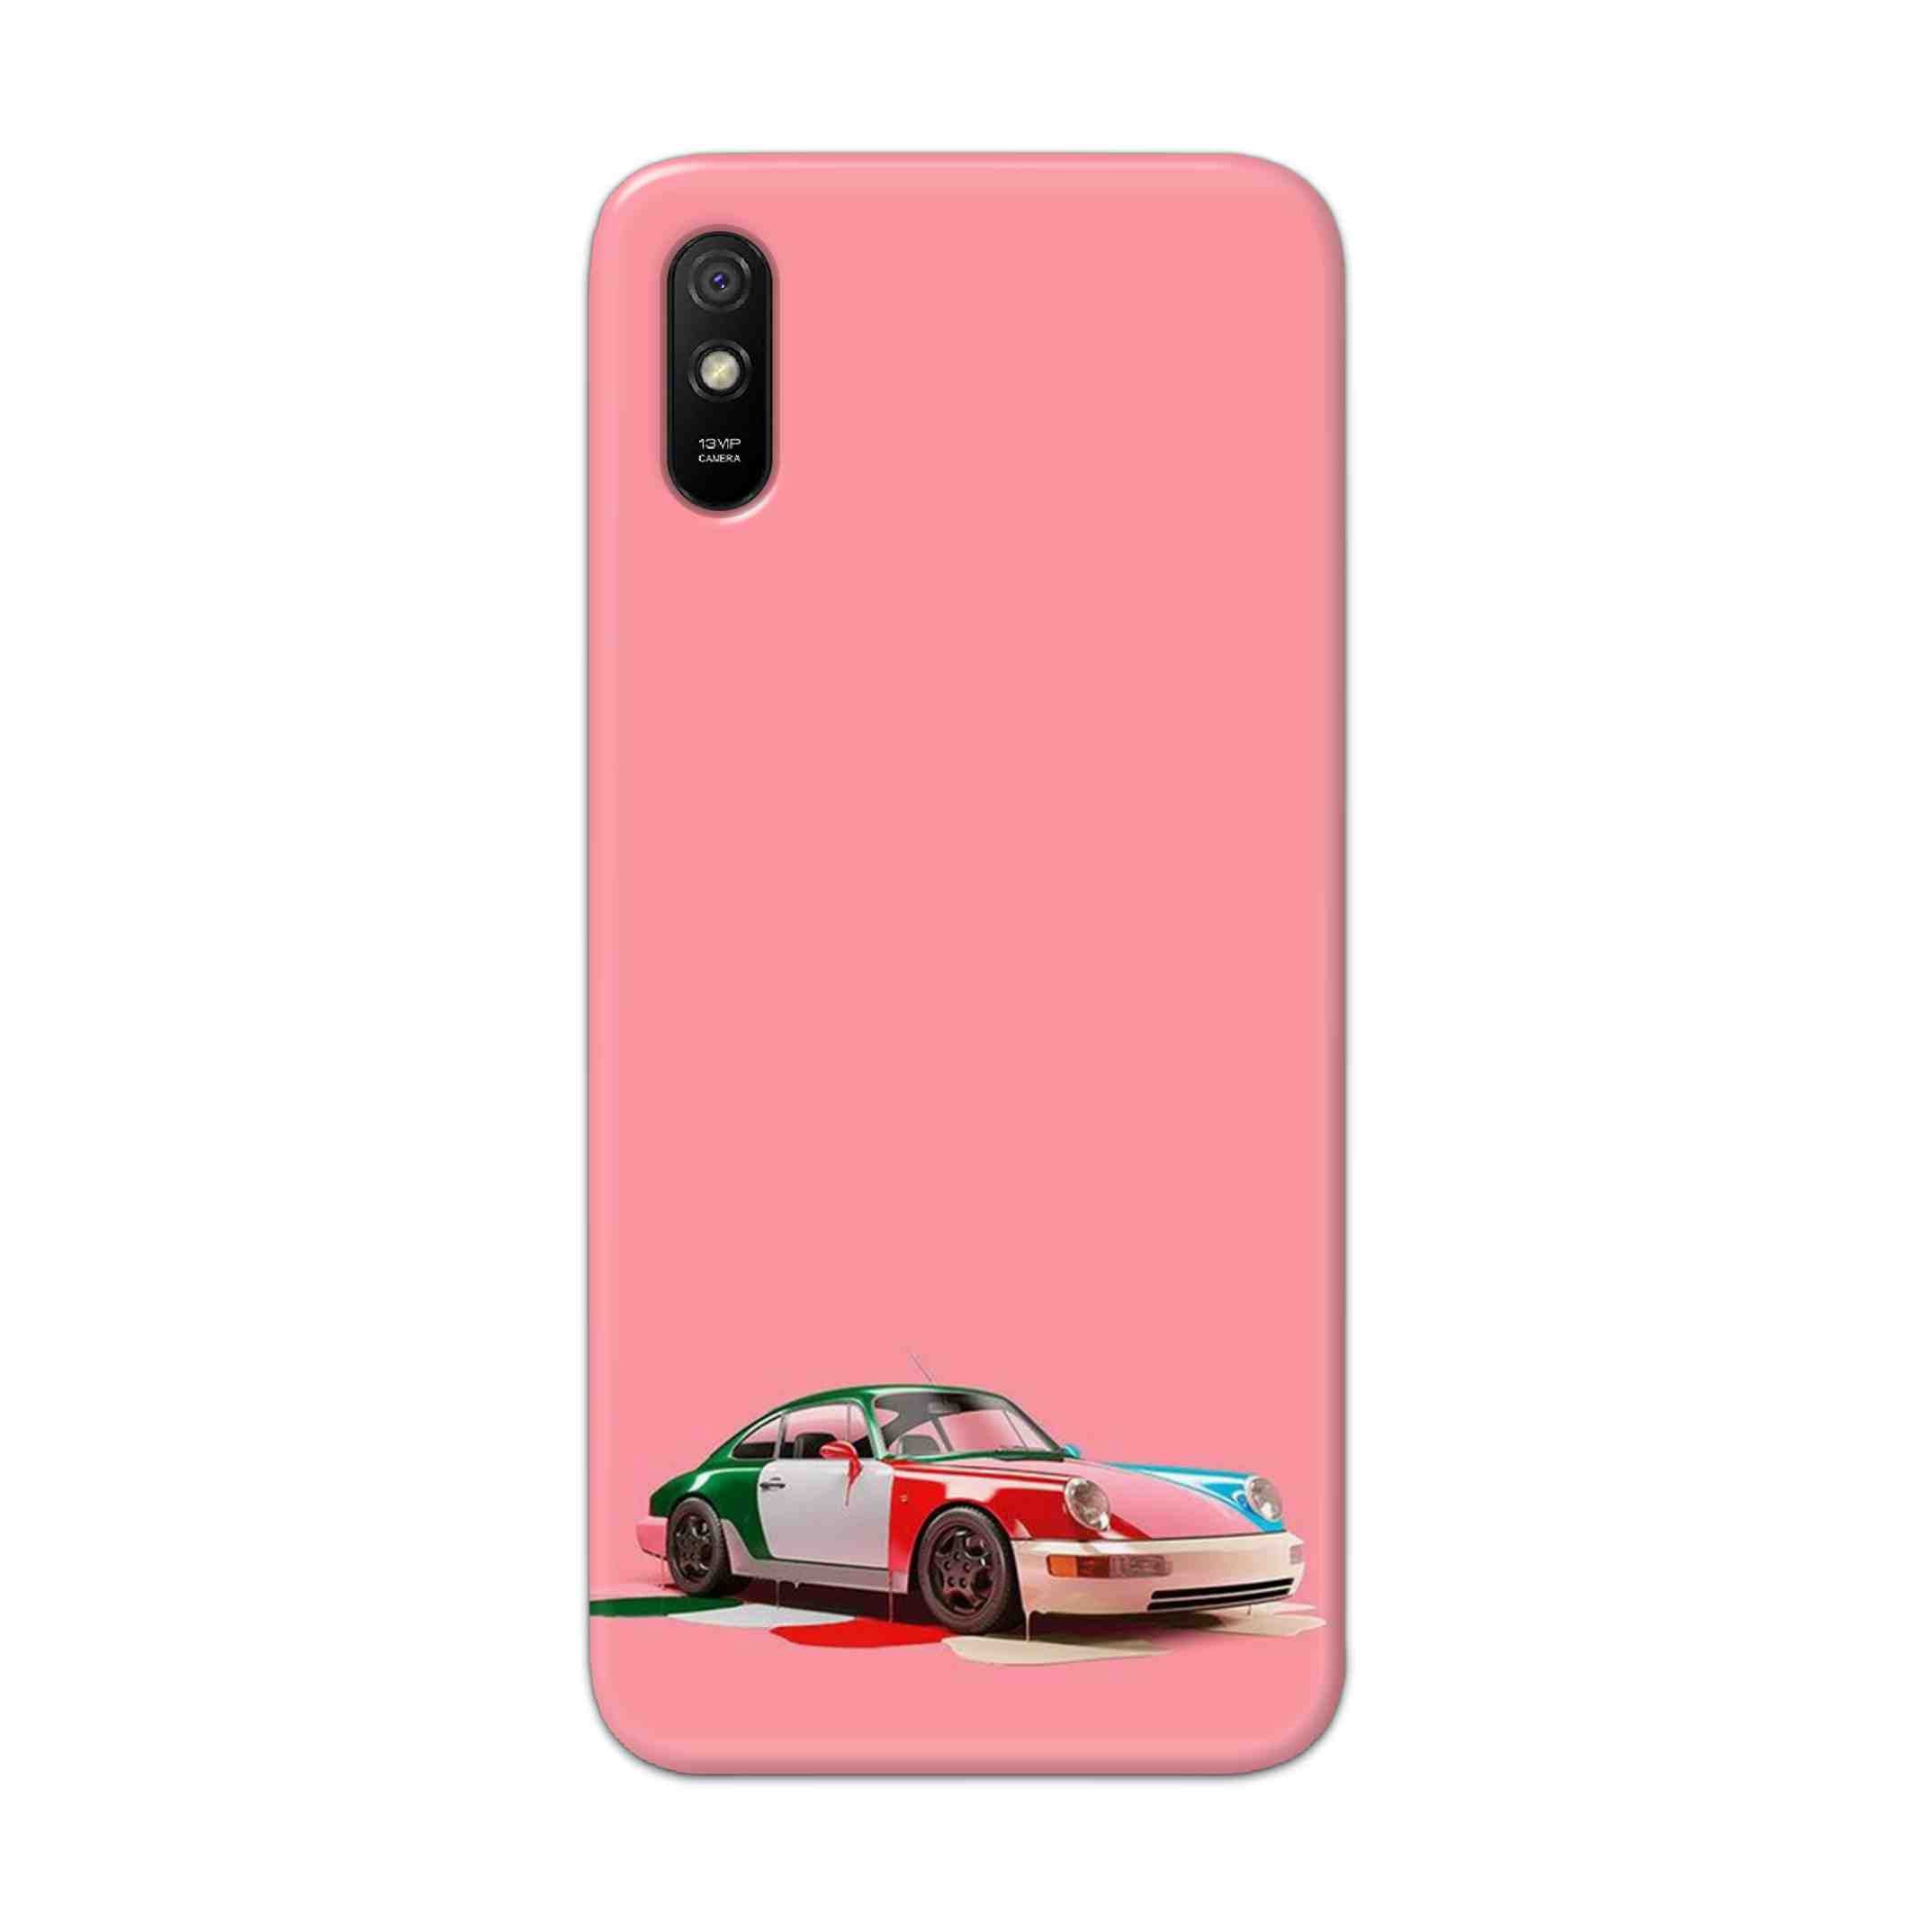 Buy Pink Porche Hard Back Mobile Phone Case Cover For Redmi 9A Online